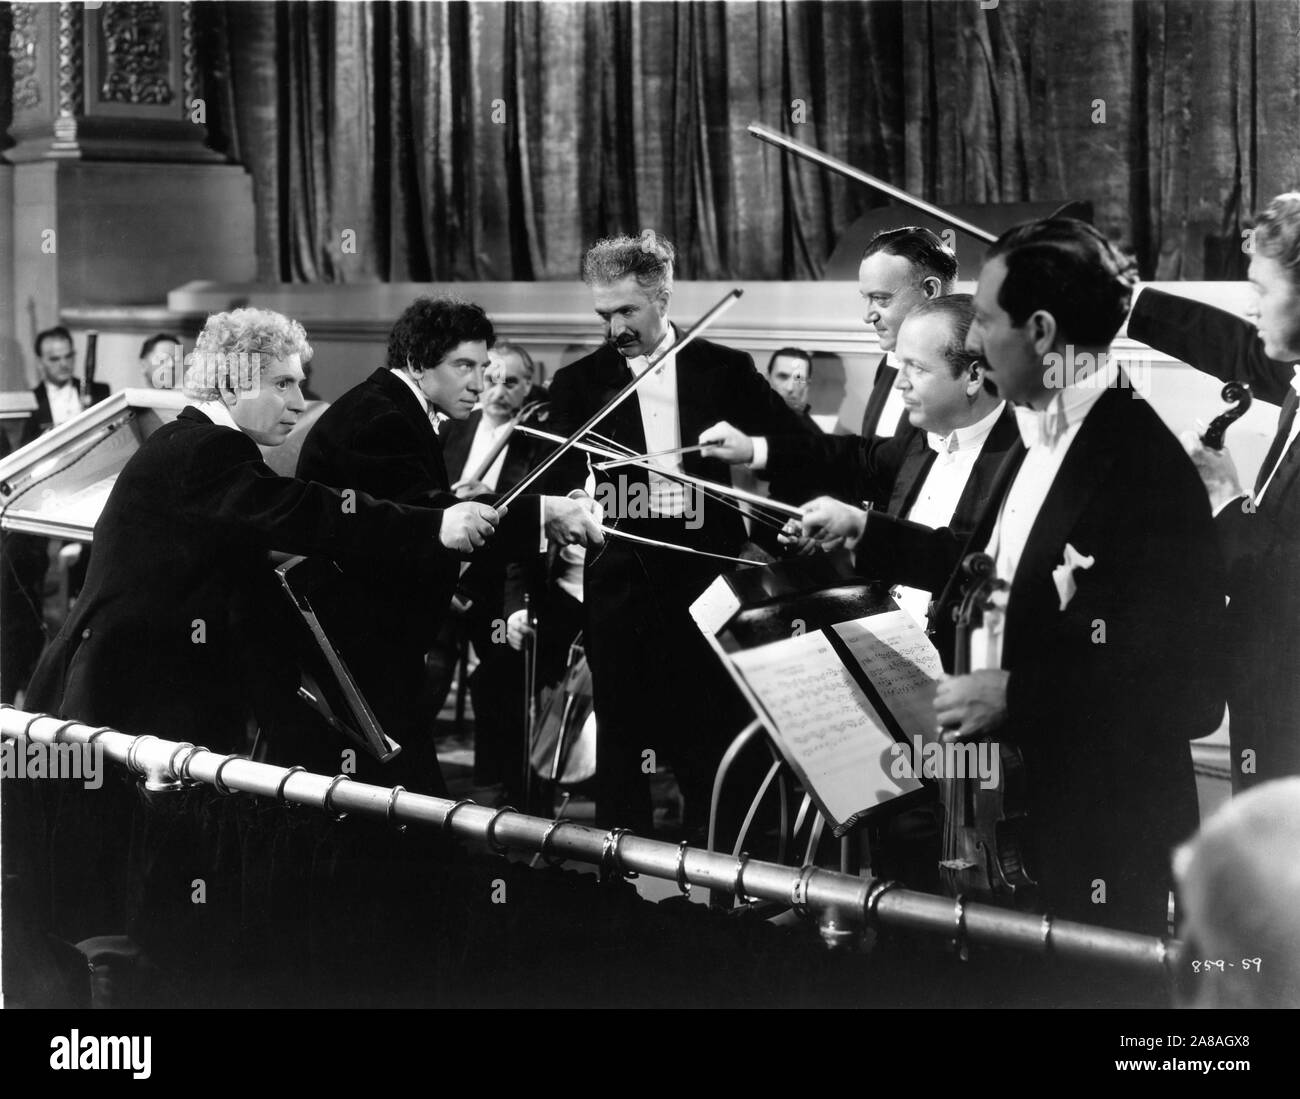 HARPO MARX CHICO MARX and JOHN ST.POLIS as the Conductor in A NIGHT AT THE OPERA 1935 director Sam Wood screenplay George S. Kaufman and Morrie Ryskind producer Irving Thalberg Metro Goldwyn Mayer Stock Photo